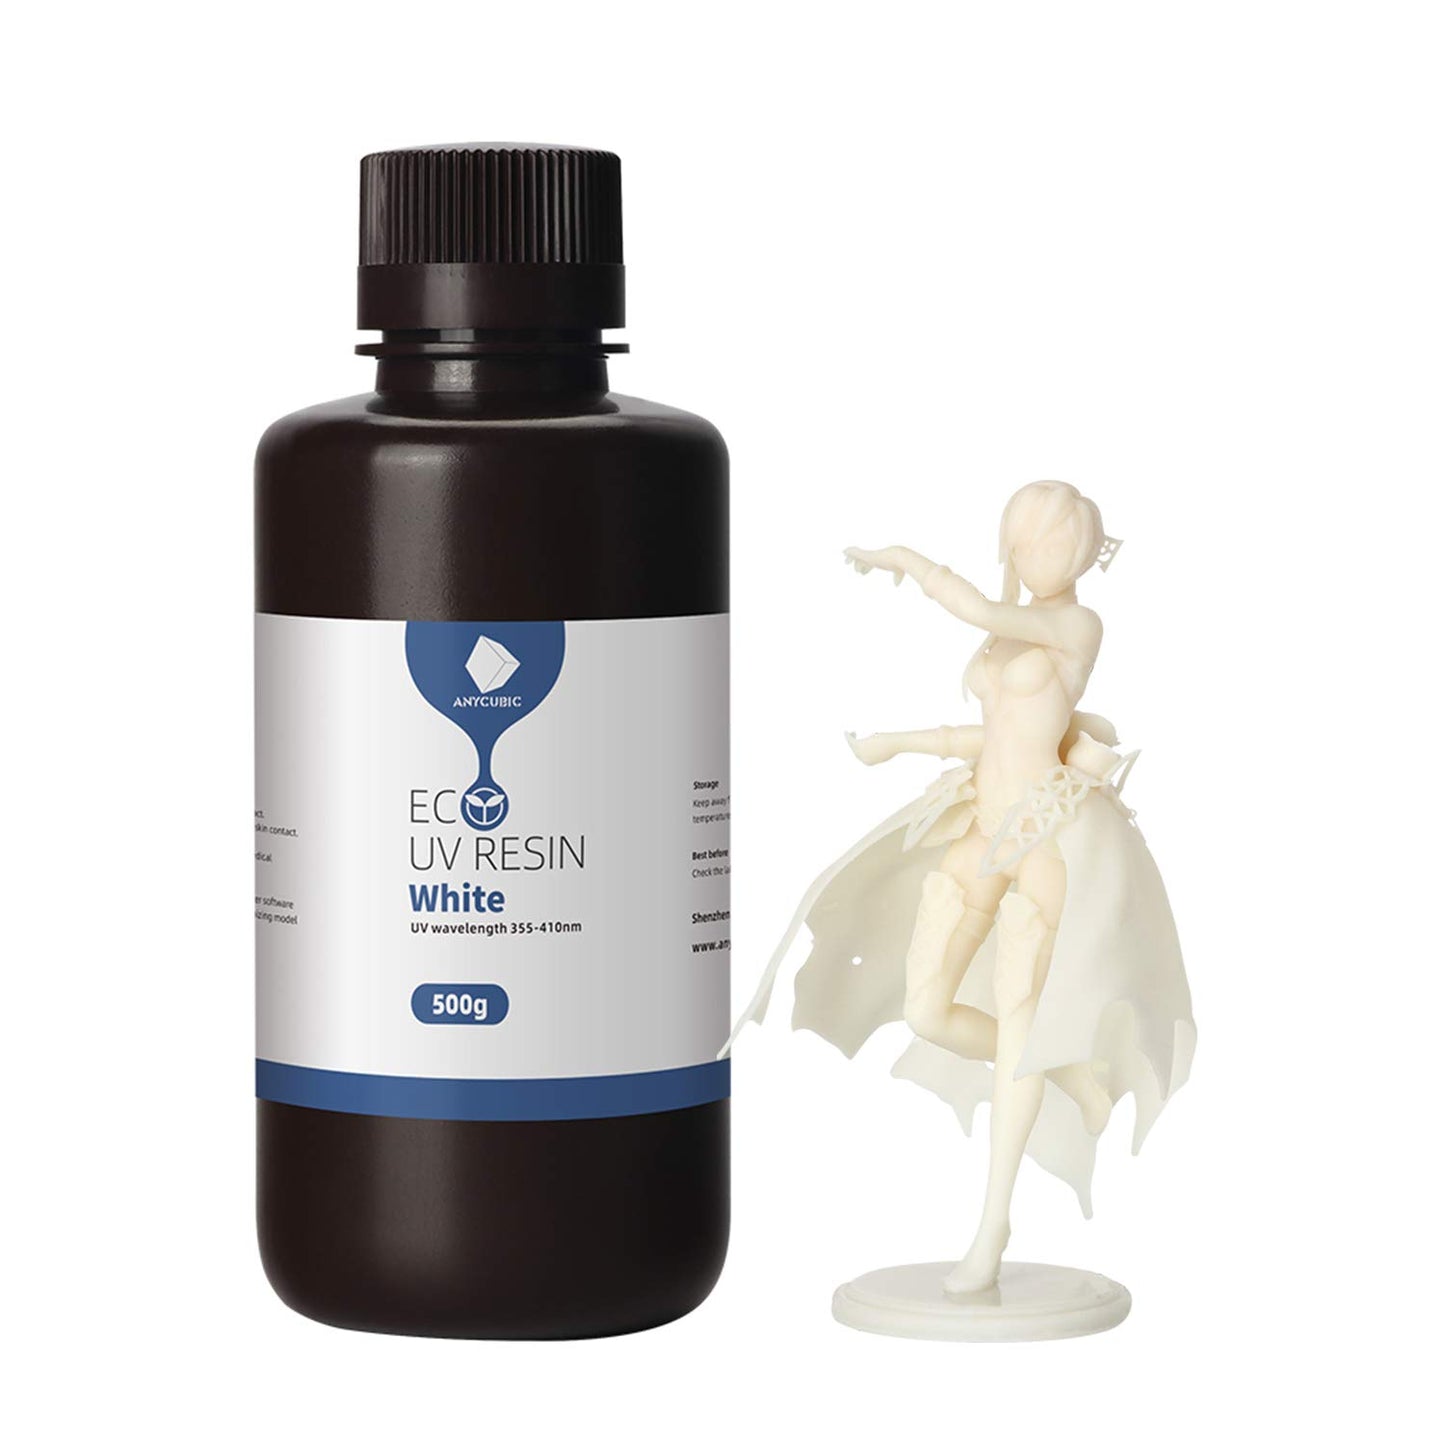 Anycubic Plant-based UV Resin